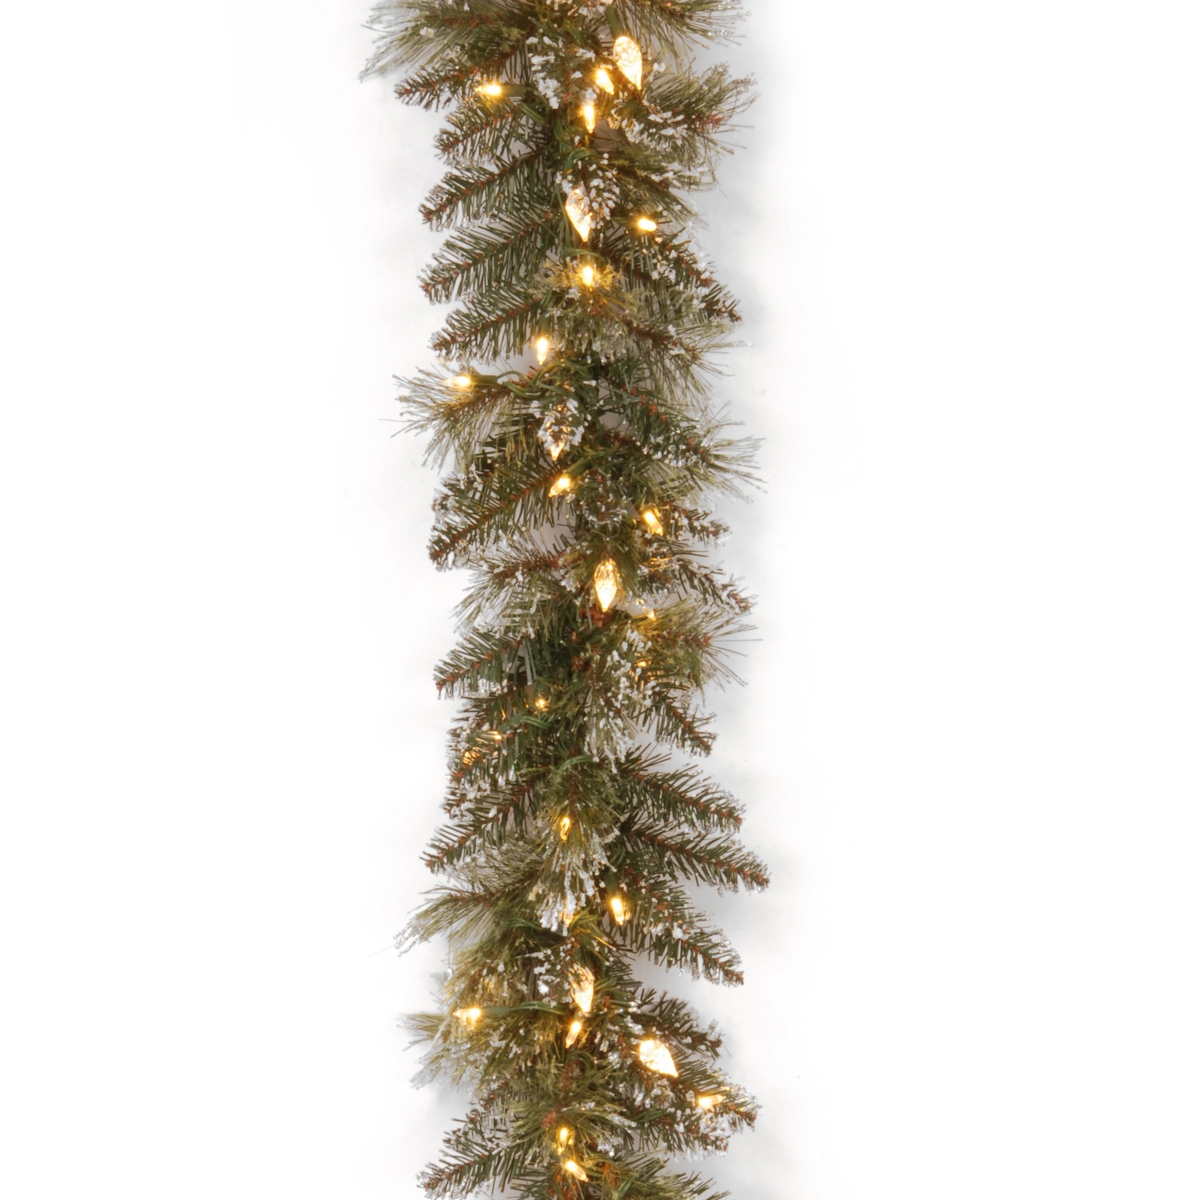 9' x 10" Glittery Bristle Pine Garland with 100 Soft White Led Lights with C7 Diamond Caps - Green